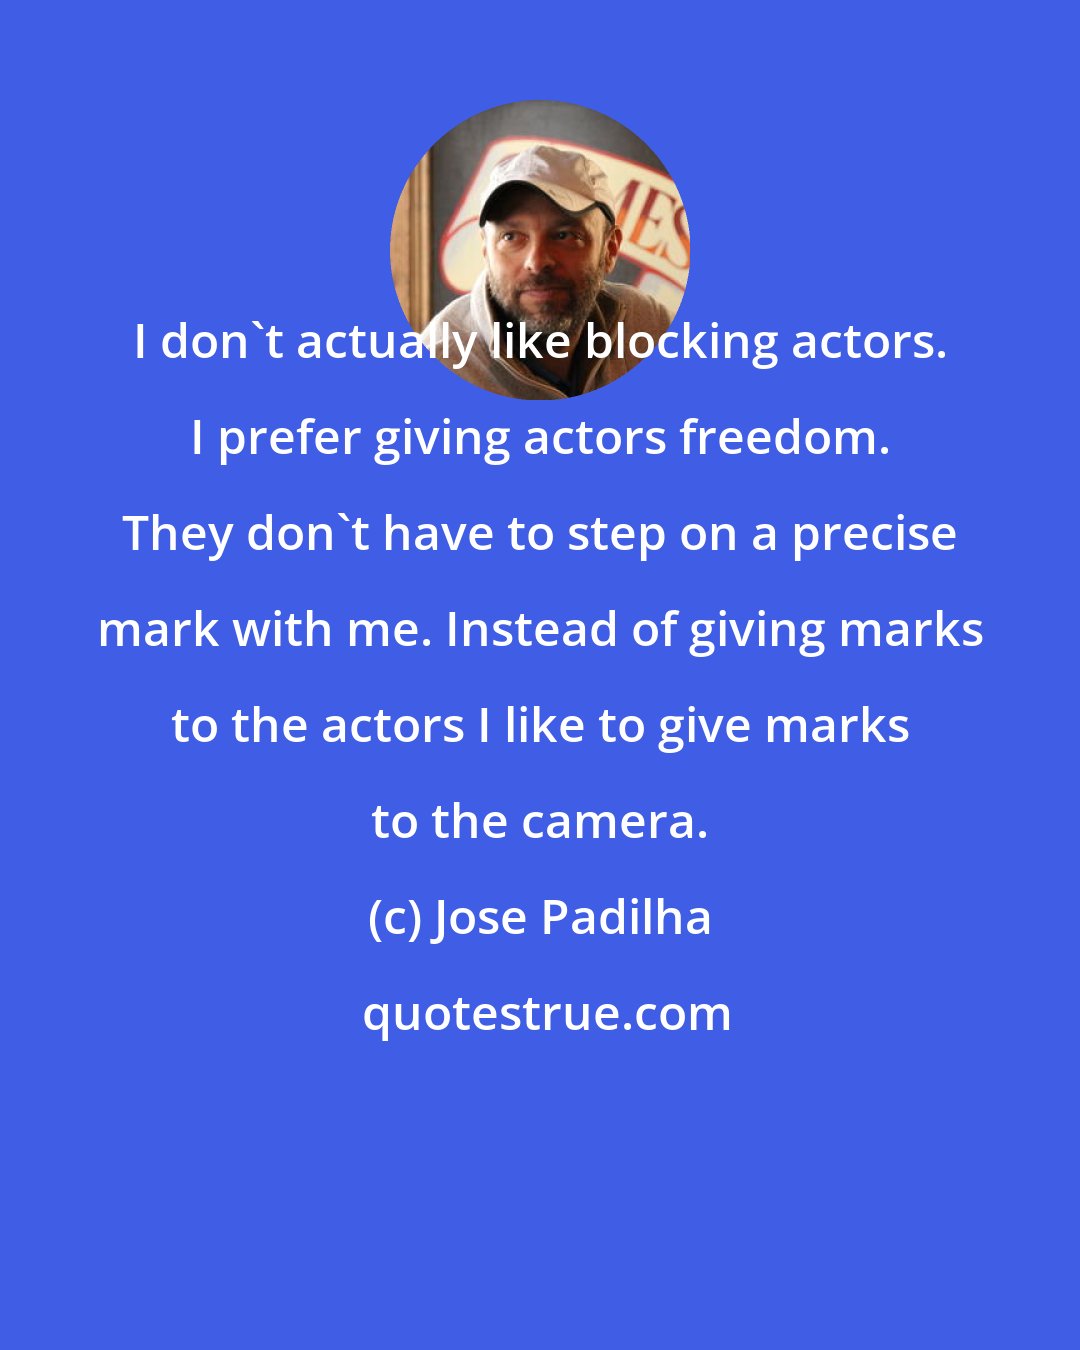 Jose Padilha: I don't actually like blocking actors. I prefer giving actors freedom. They don't have to step on a precise mark with me. Instead of giving marks to the actors I like to give marks to the camera.